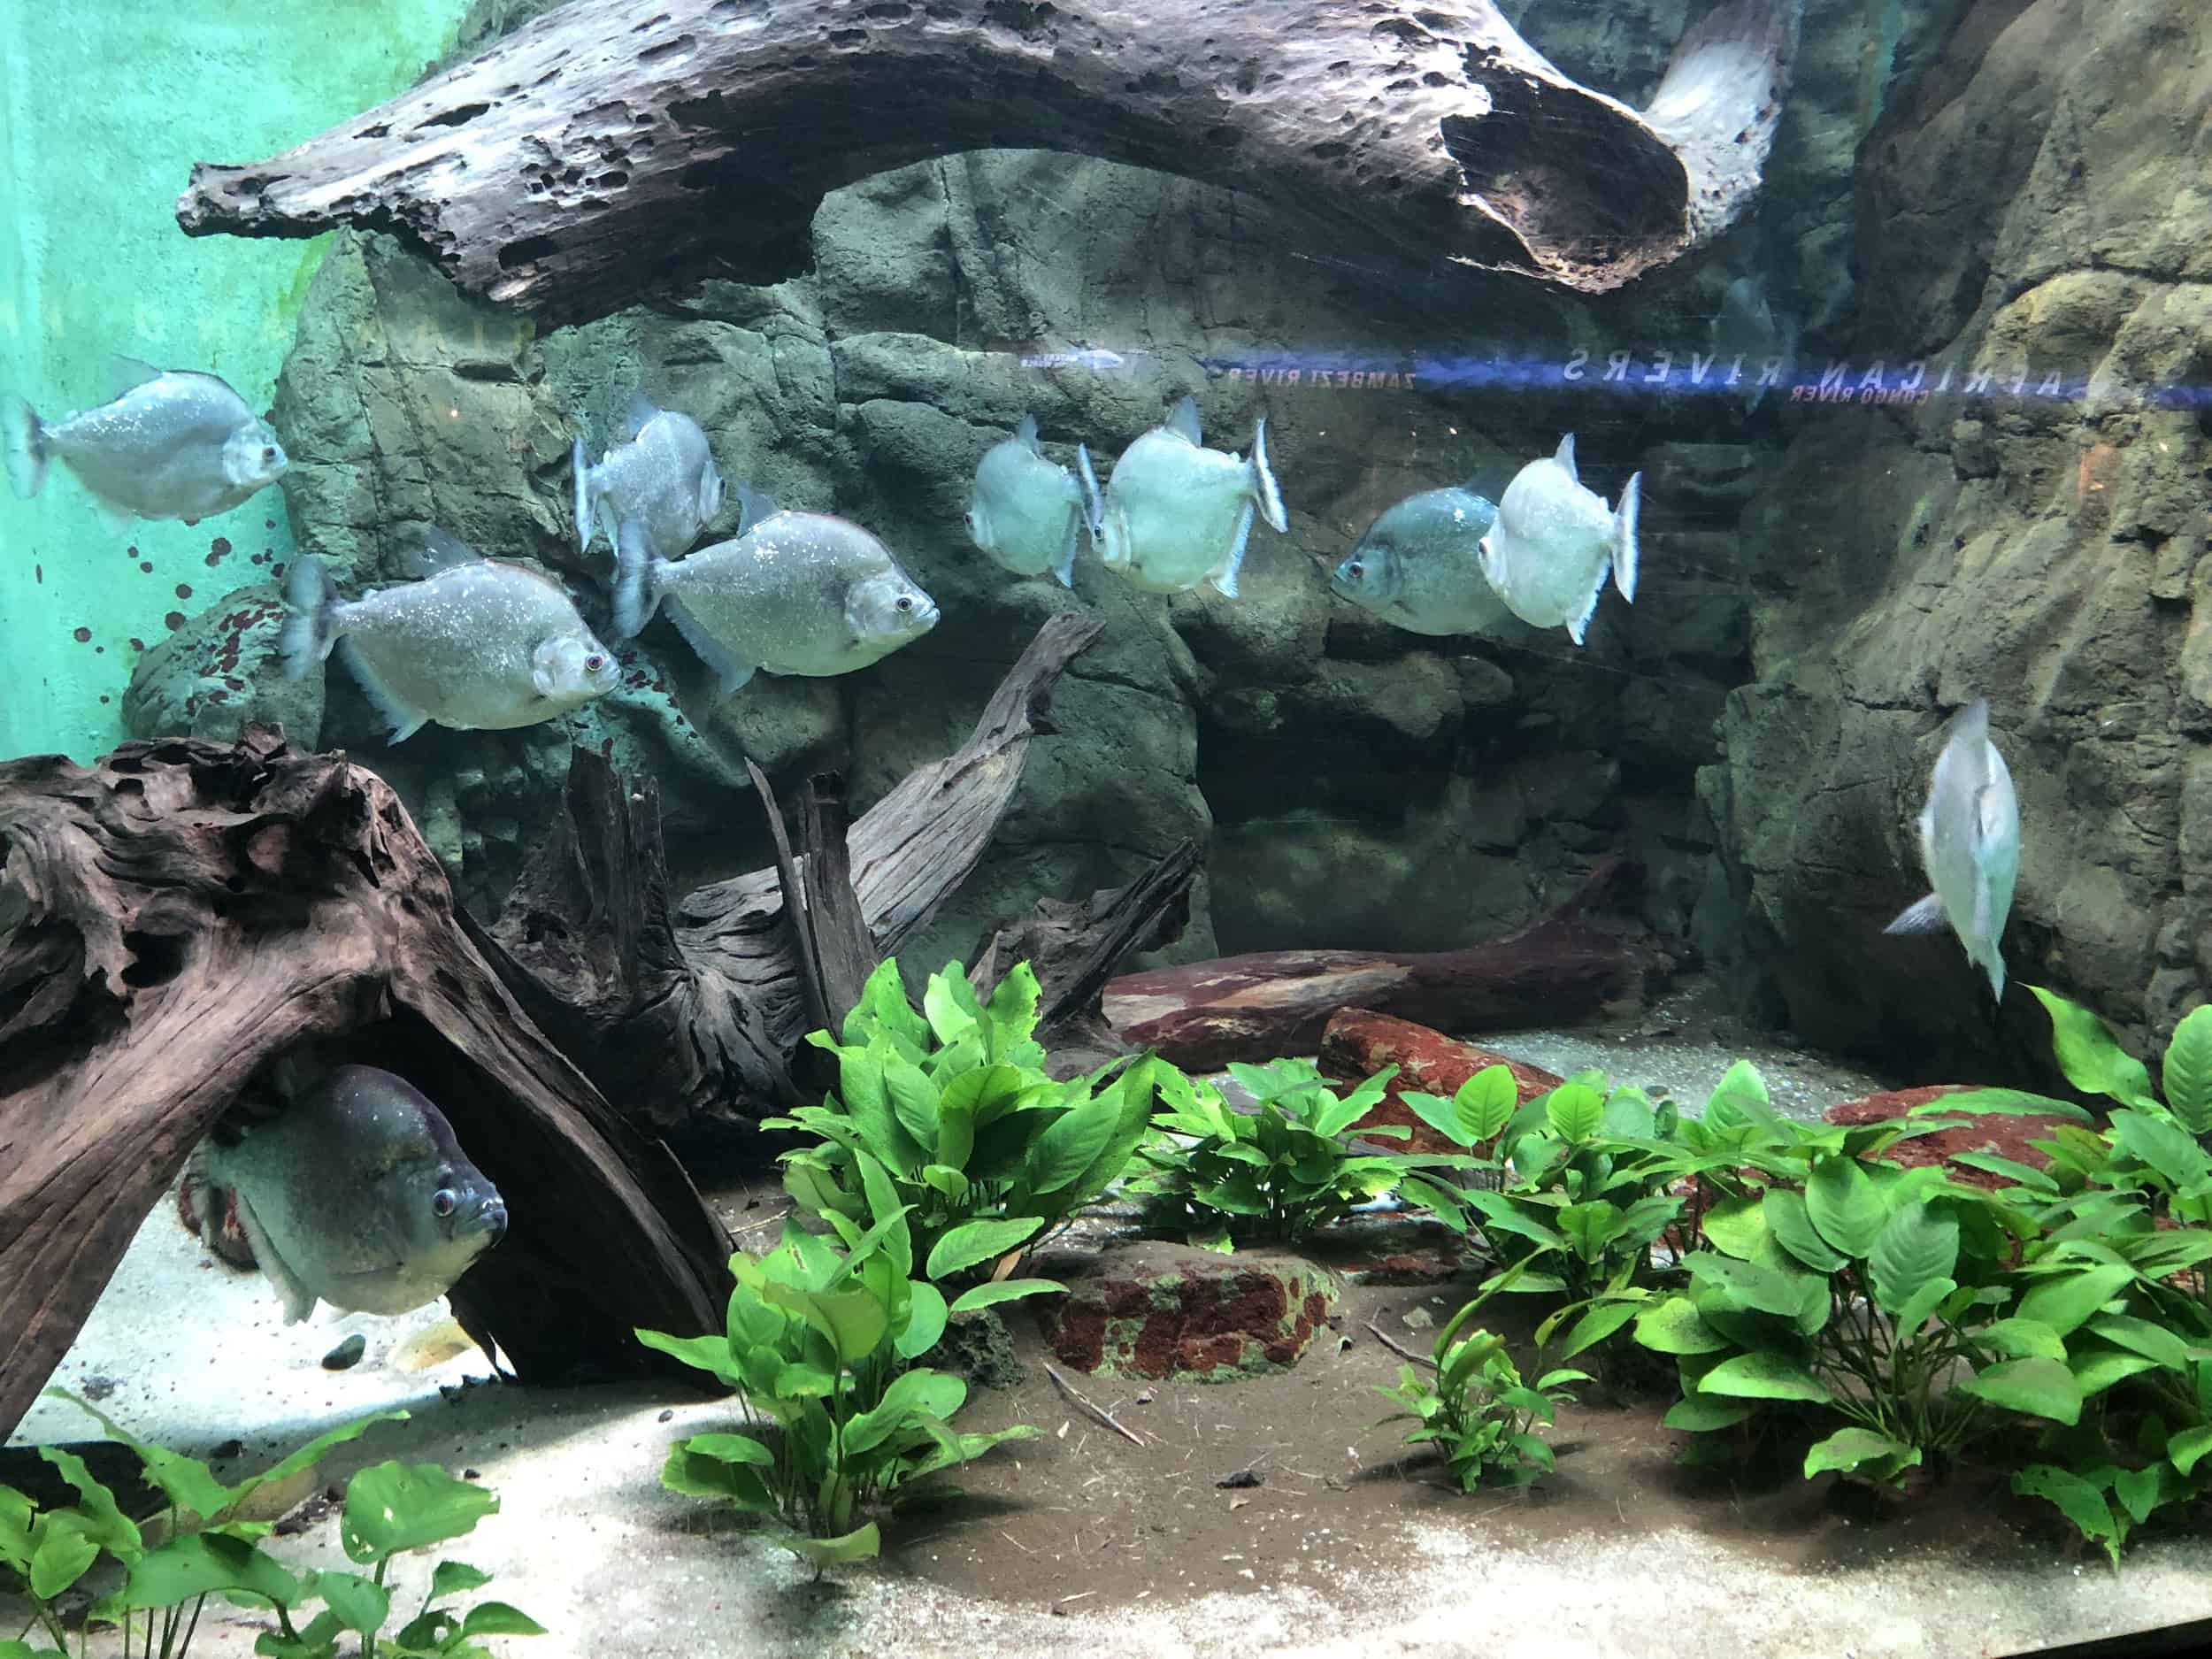 Violet-line piranhas in Rivers on the Main Level at the Shedd Aquarium in Chicago, Illinois